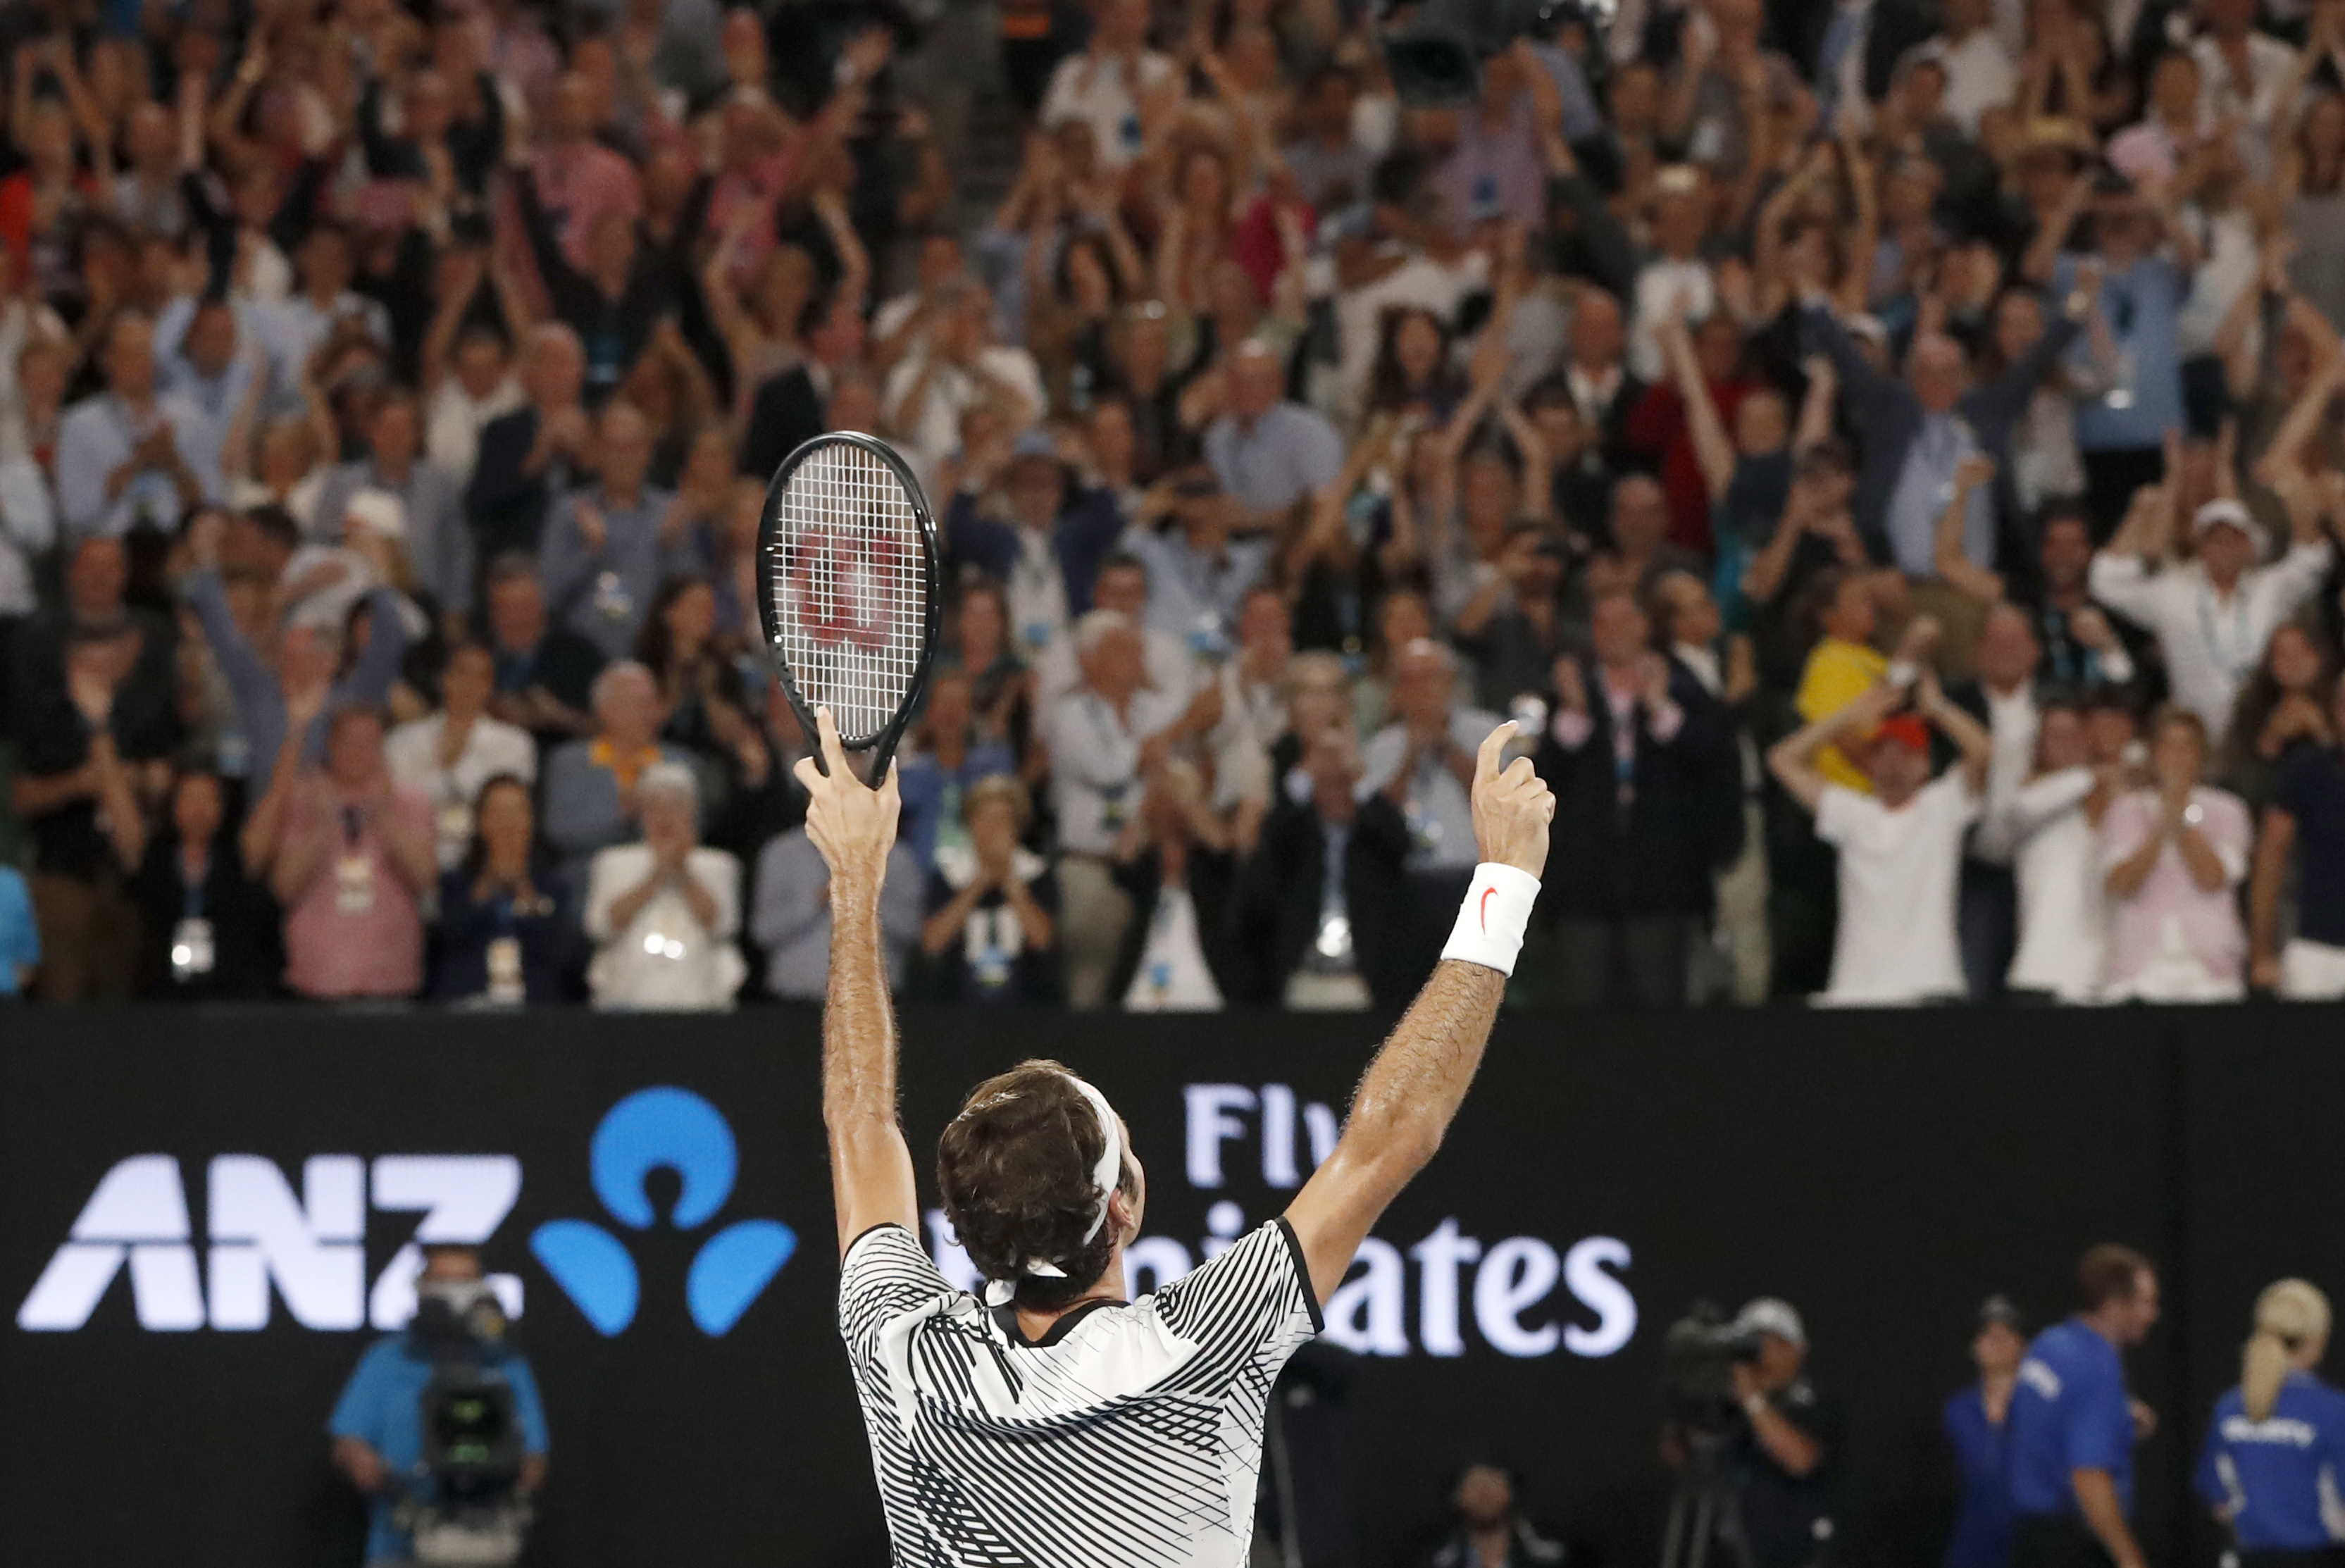 Watch final point of Roger thrilling Australian Open win | For The Win